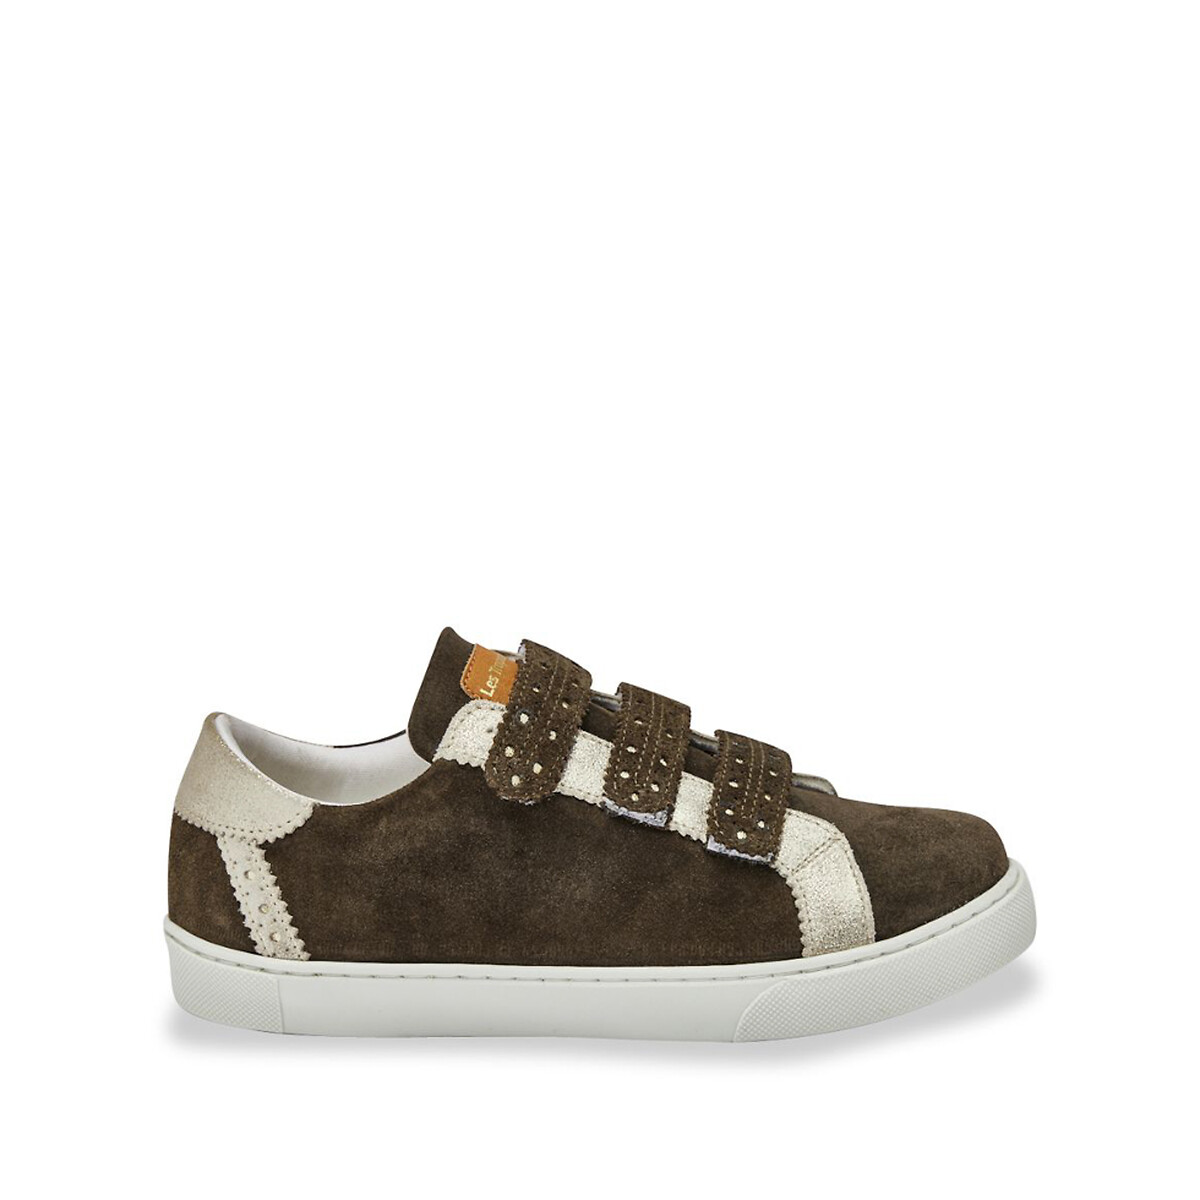 Suzari Suede Trainers with Touch ’n’ Close Fastening